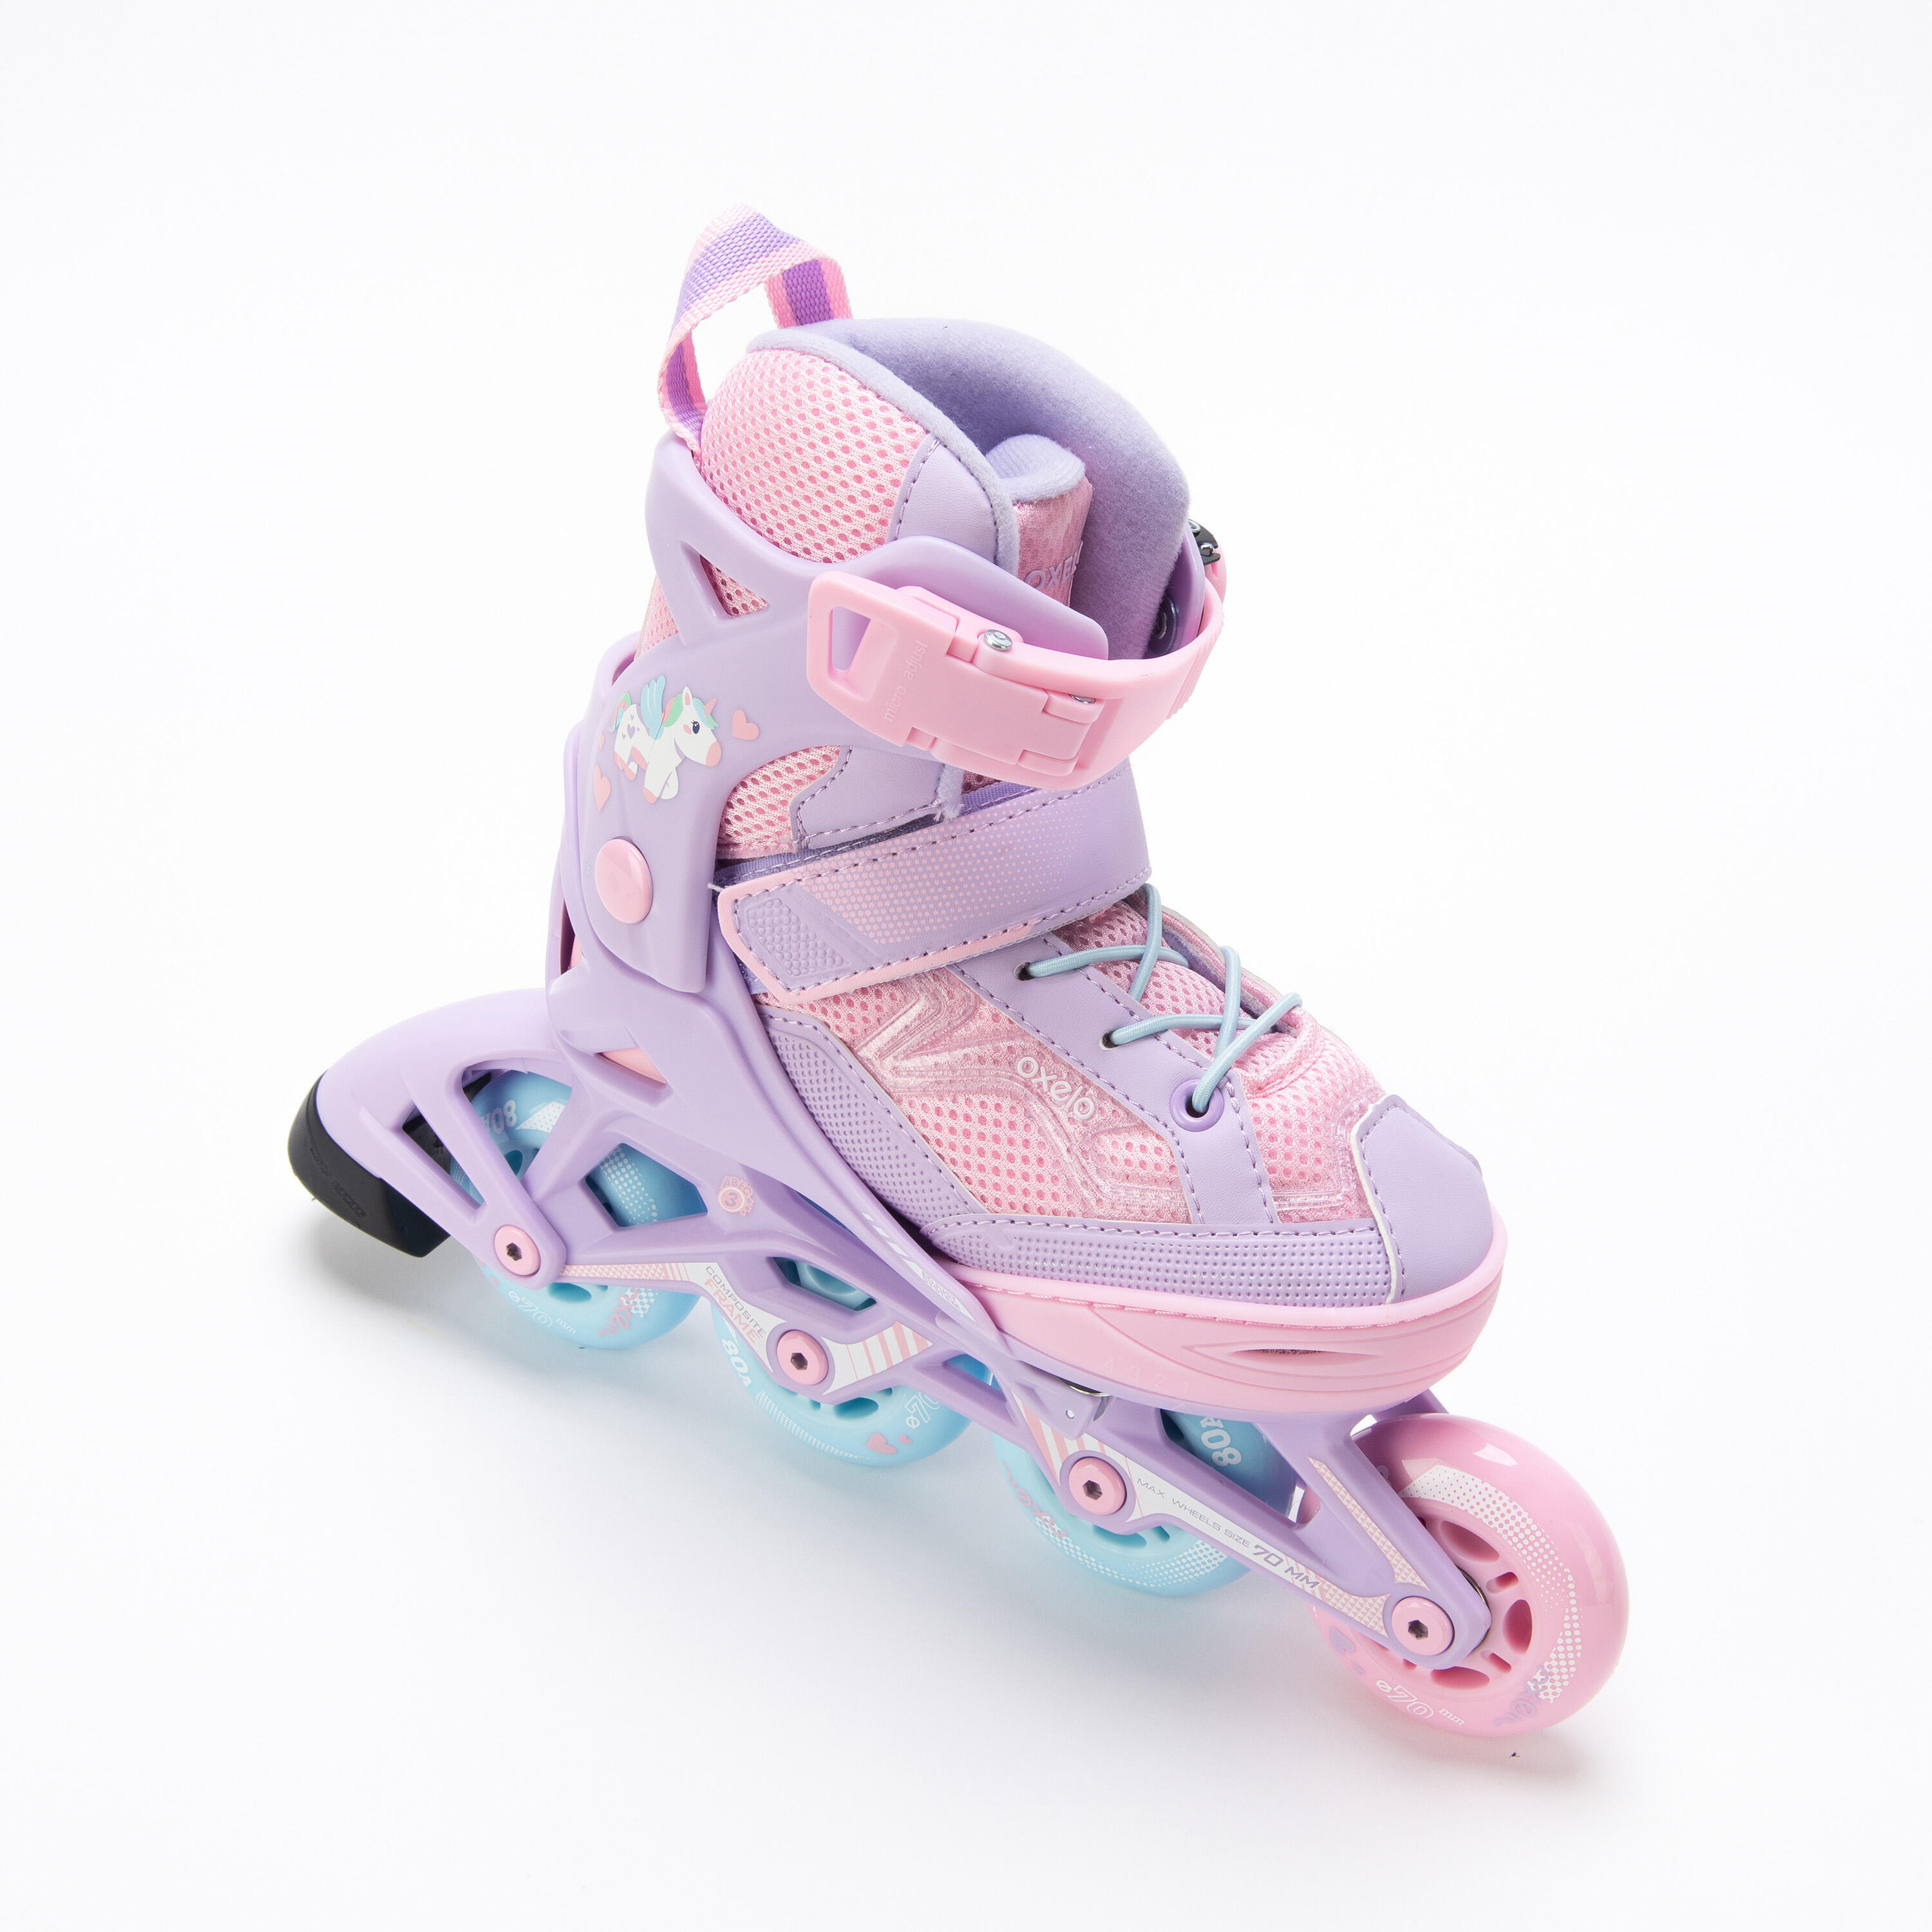 OXELO Inline Skates Inliner RS ILS FIT3 CN helllila